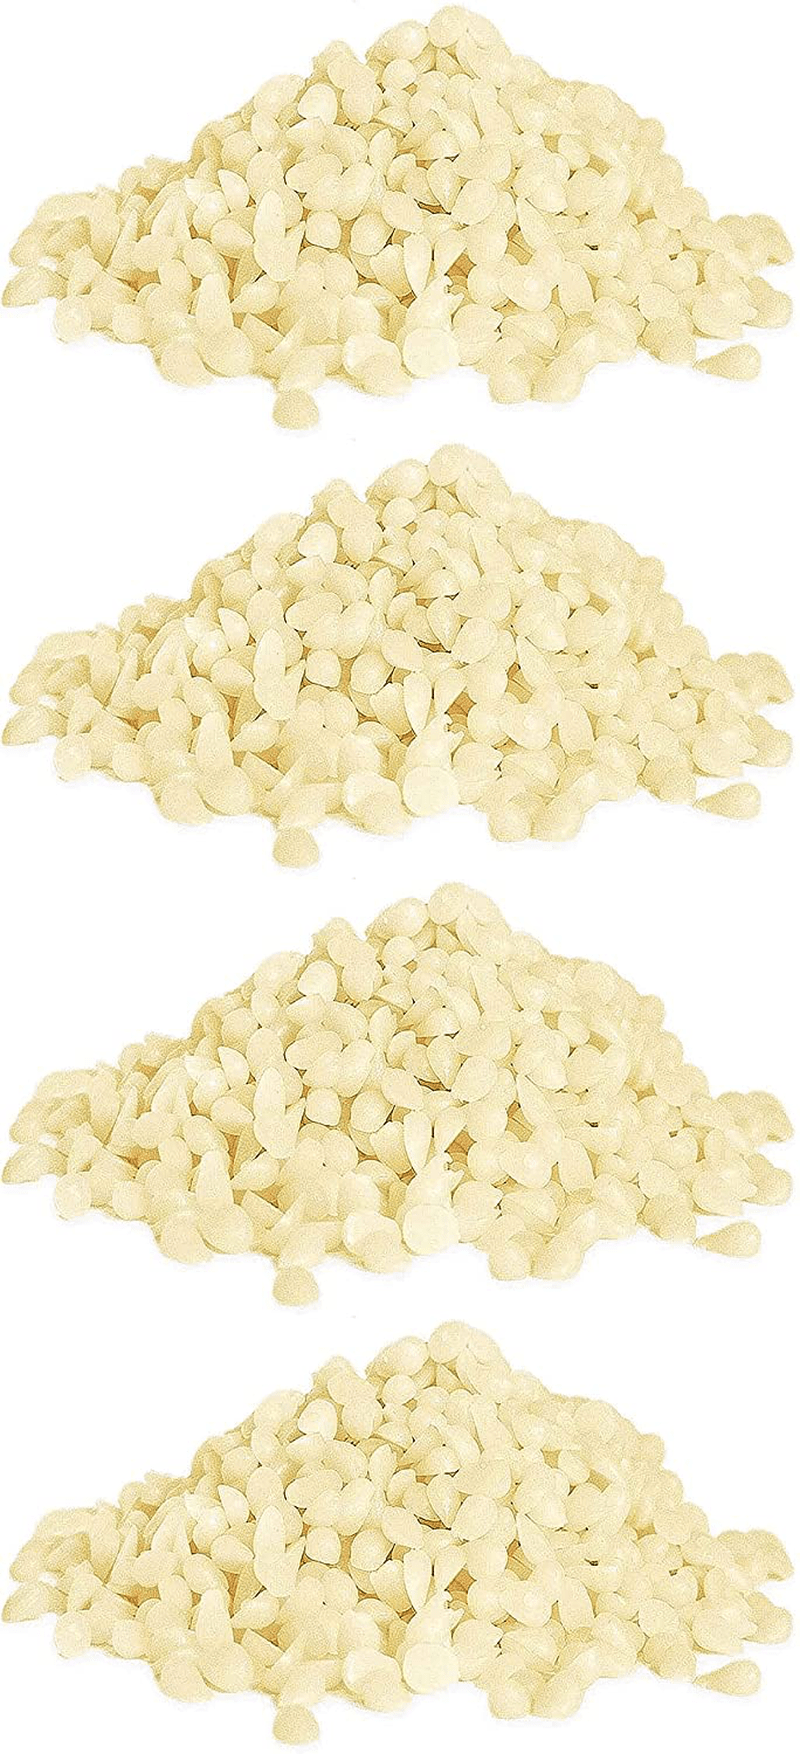 YIHANG White Beeswax Pellets 10 lb-(160 oz) (Two Pack)